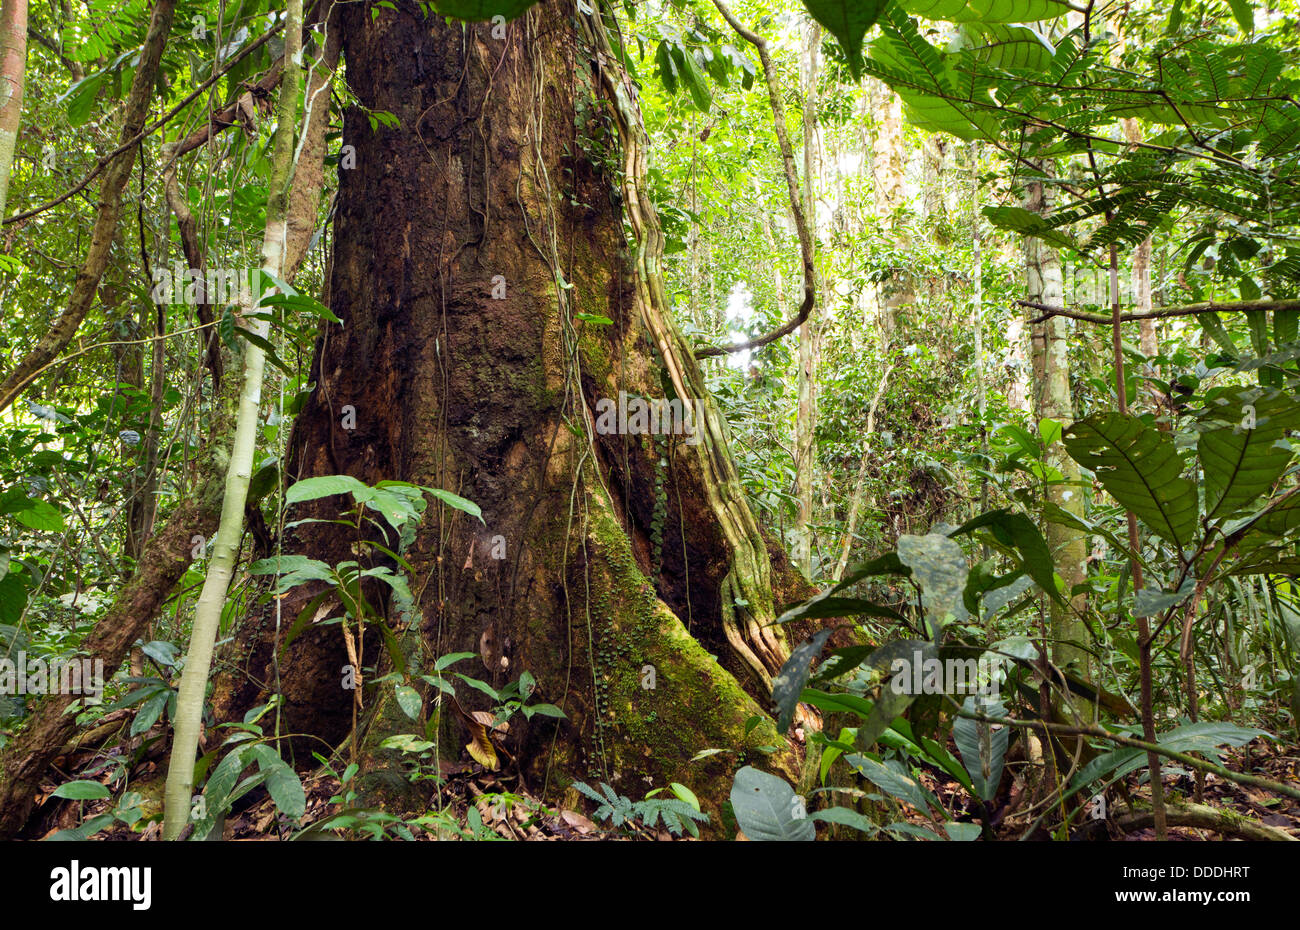 large tree with buttress roots in primary tropical rainforest, Ecuador Stock Photo